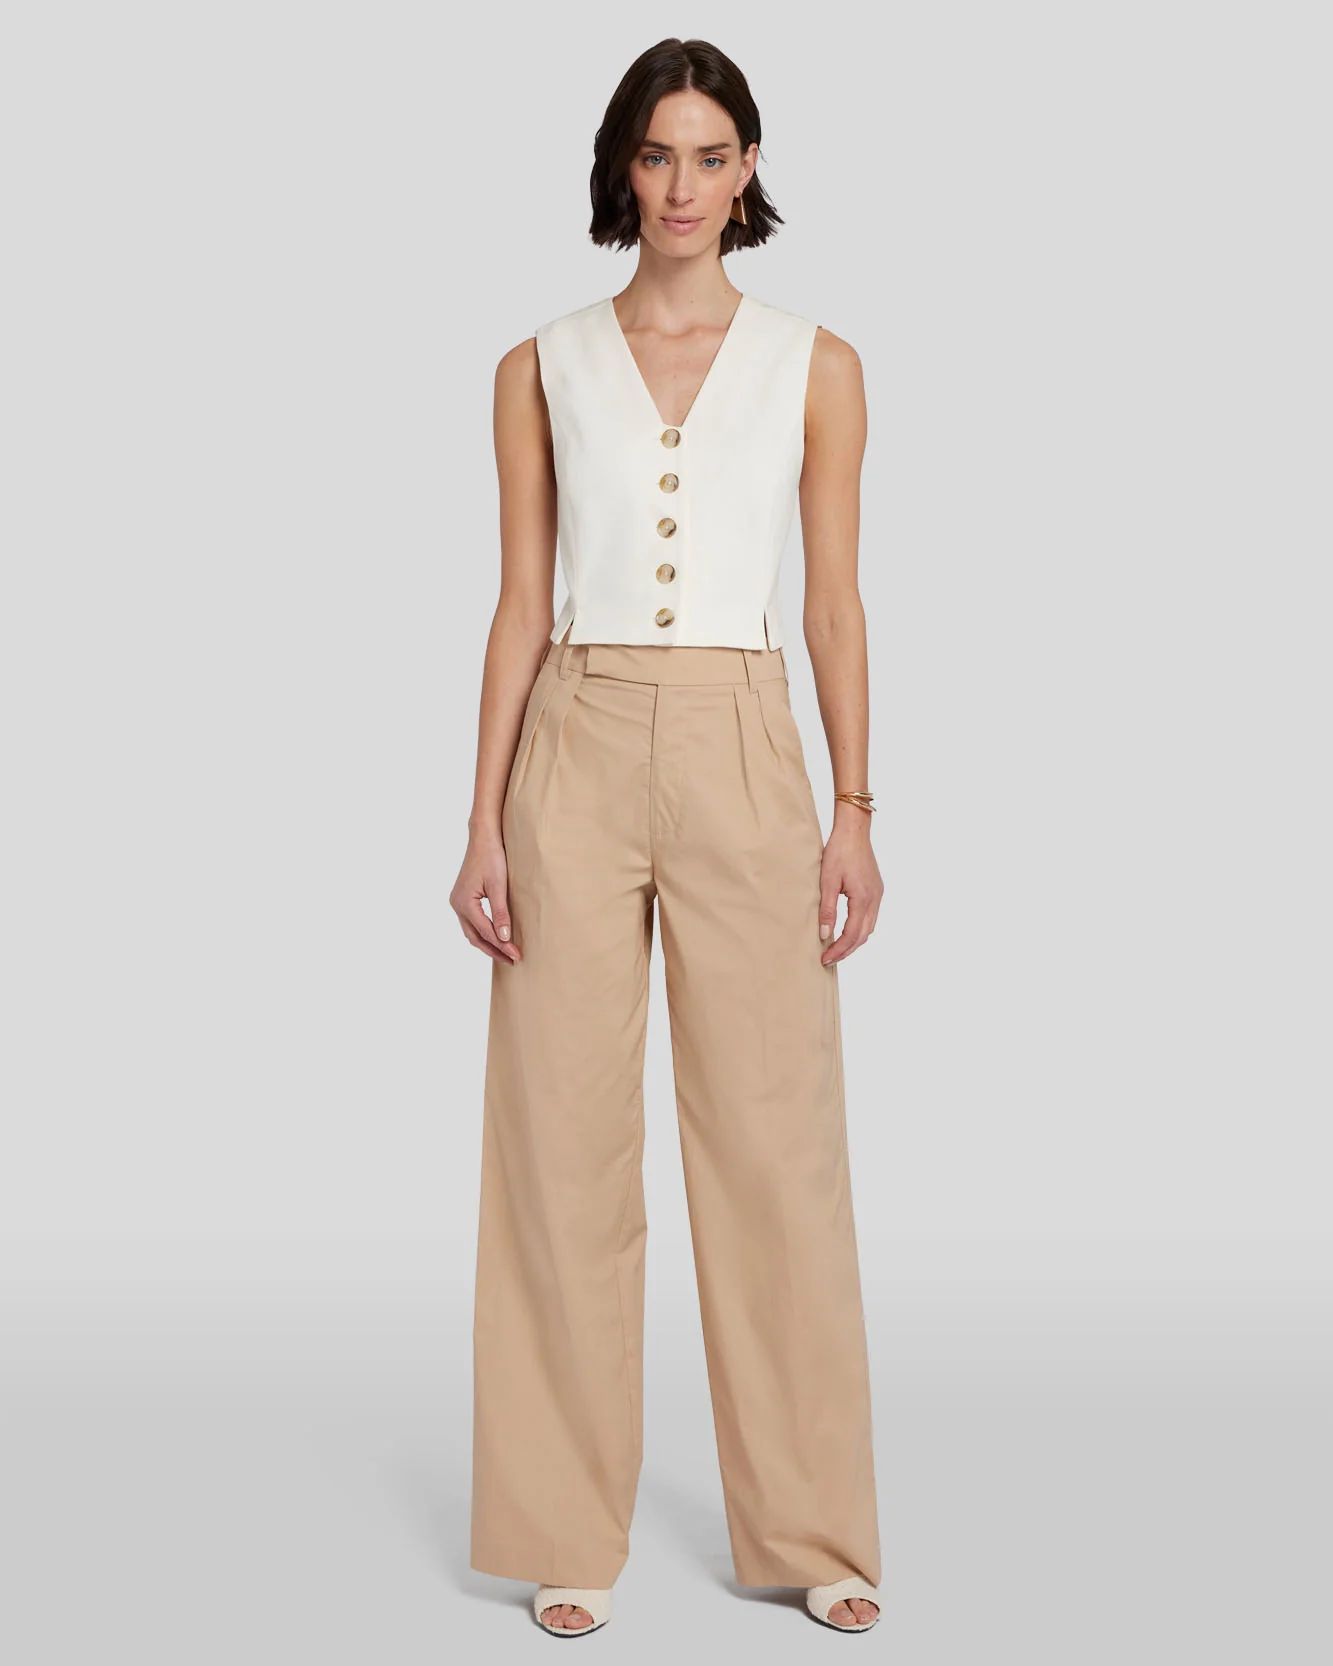 Pleated Poplin Trouser in Soft Camel | 7 For All Mankind